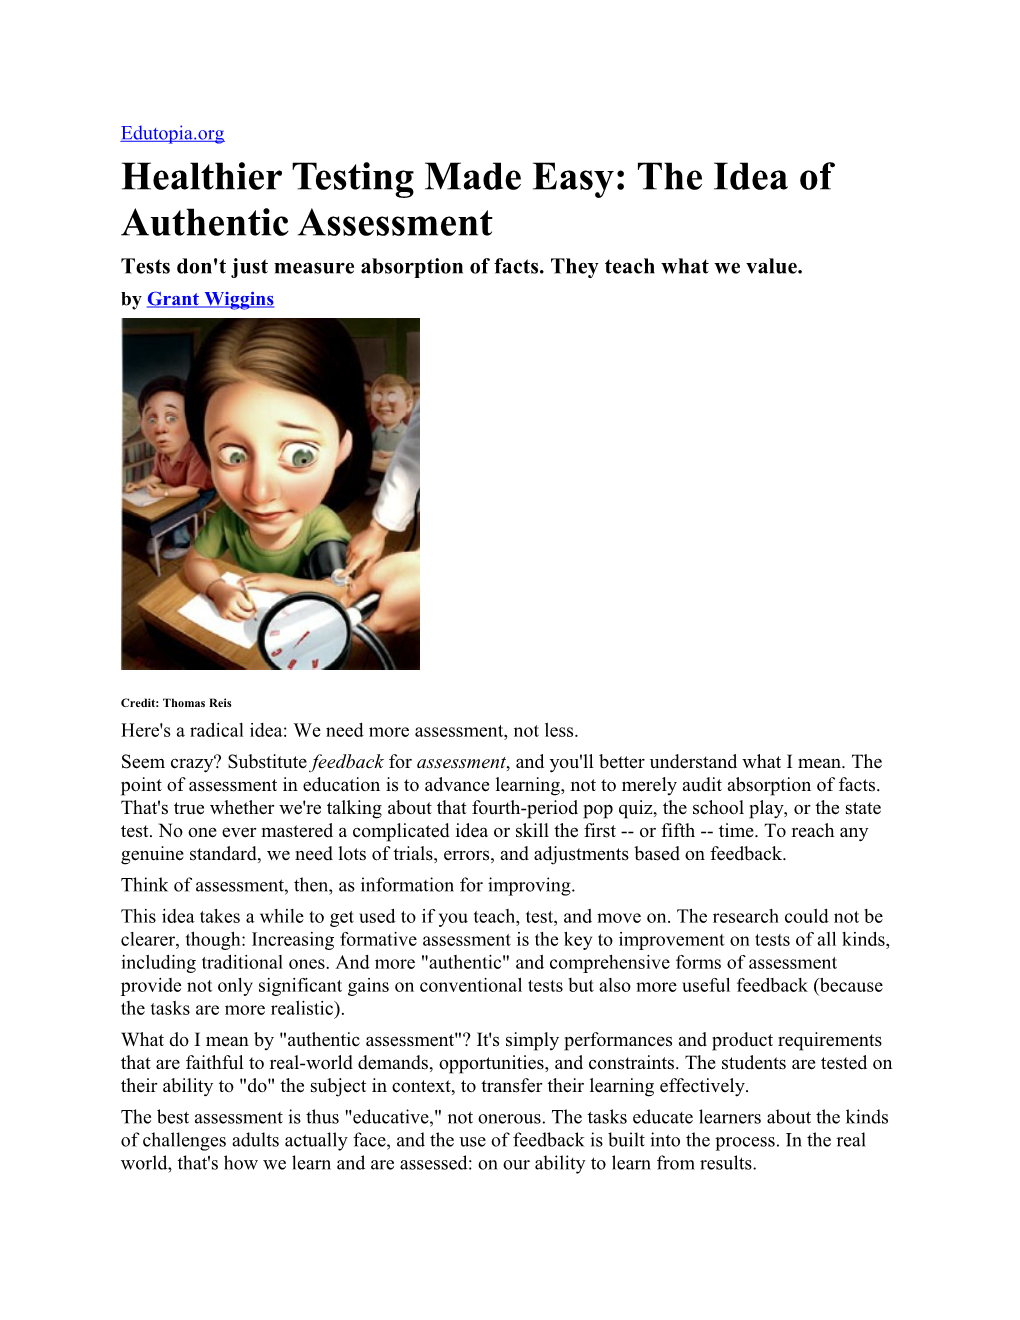 Healthier Testing Made Easy: the Idea of Authentic Assessment